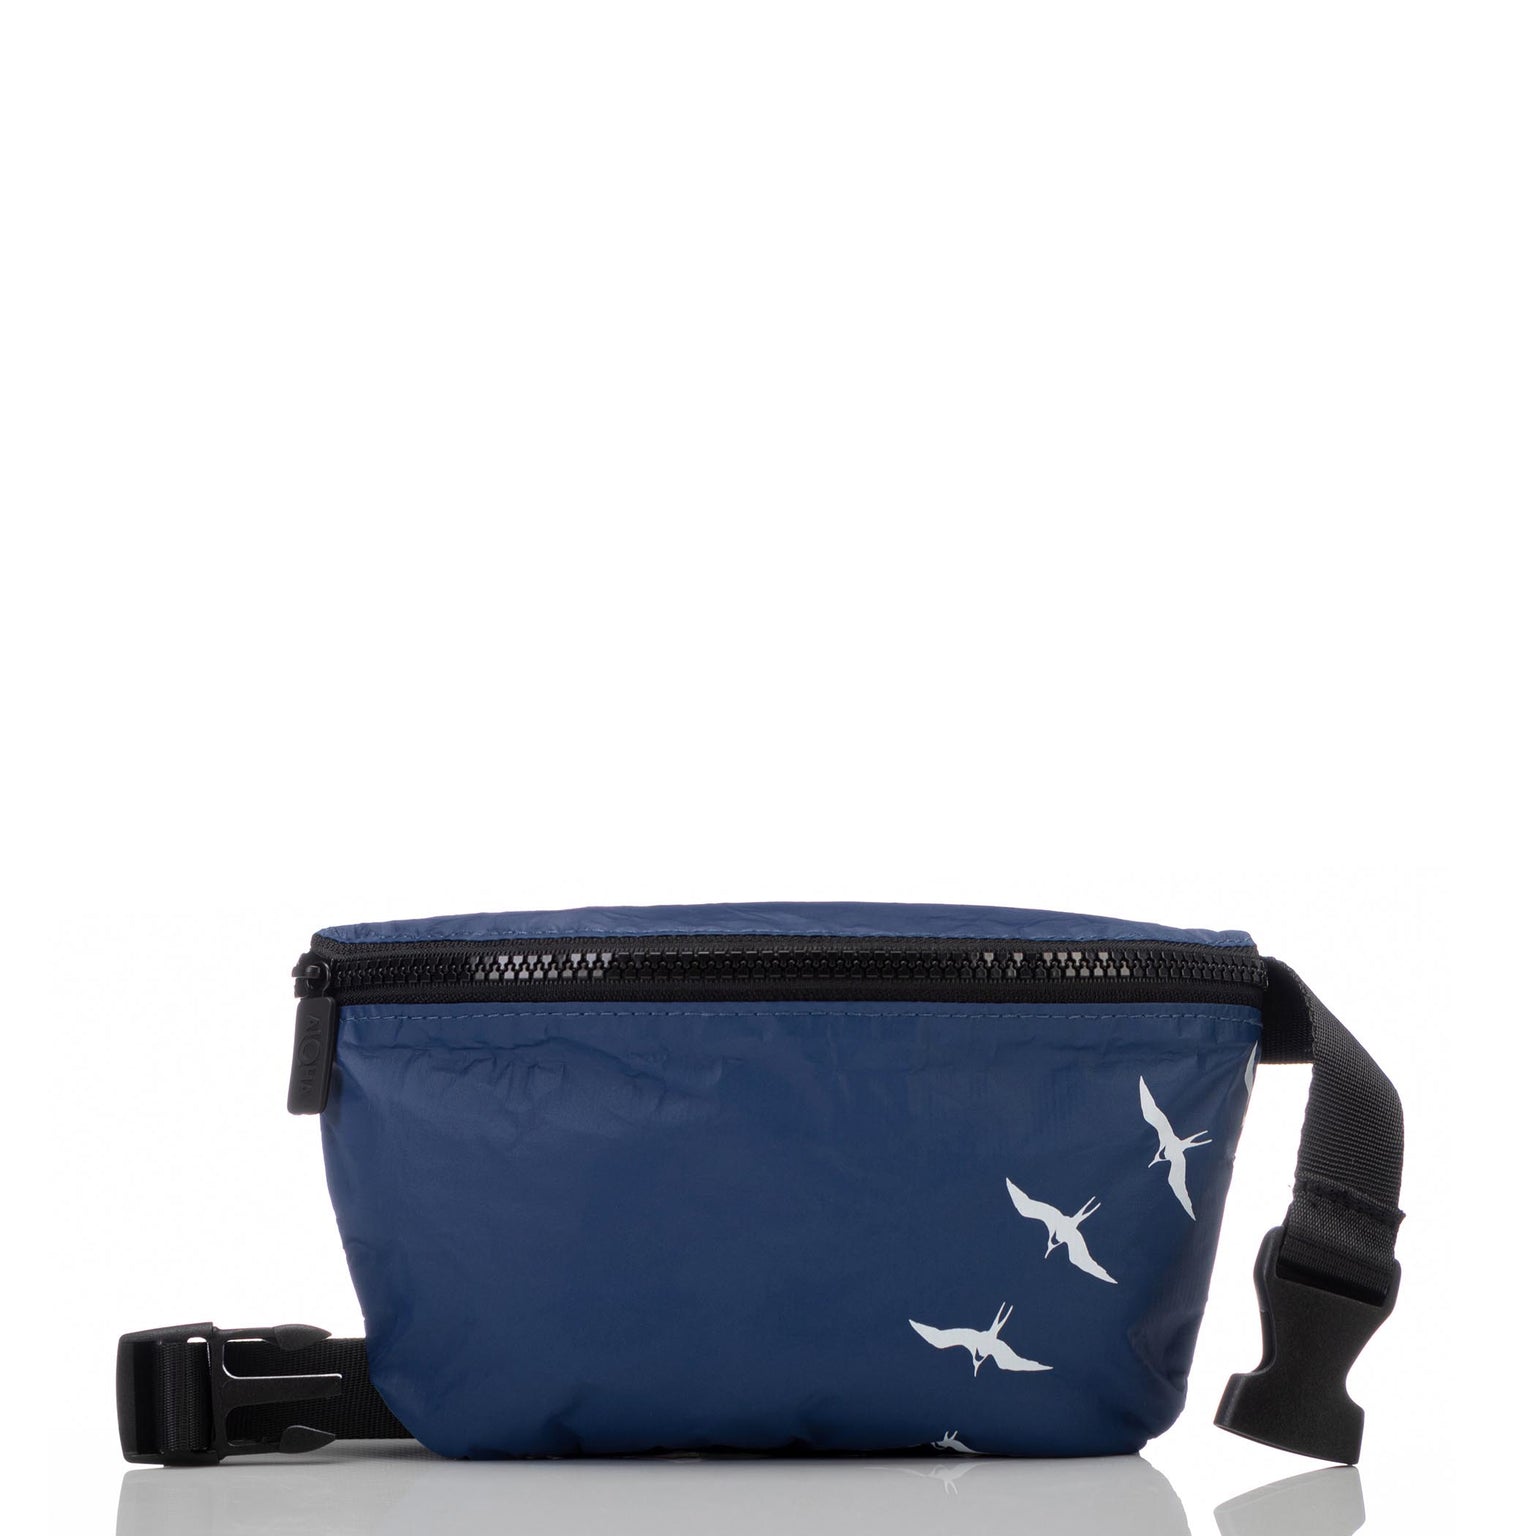 ʻIwa Birds Mini Hip Pack in White on Navy | ALOHA Collection